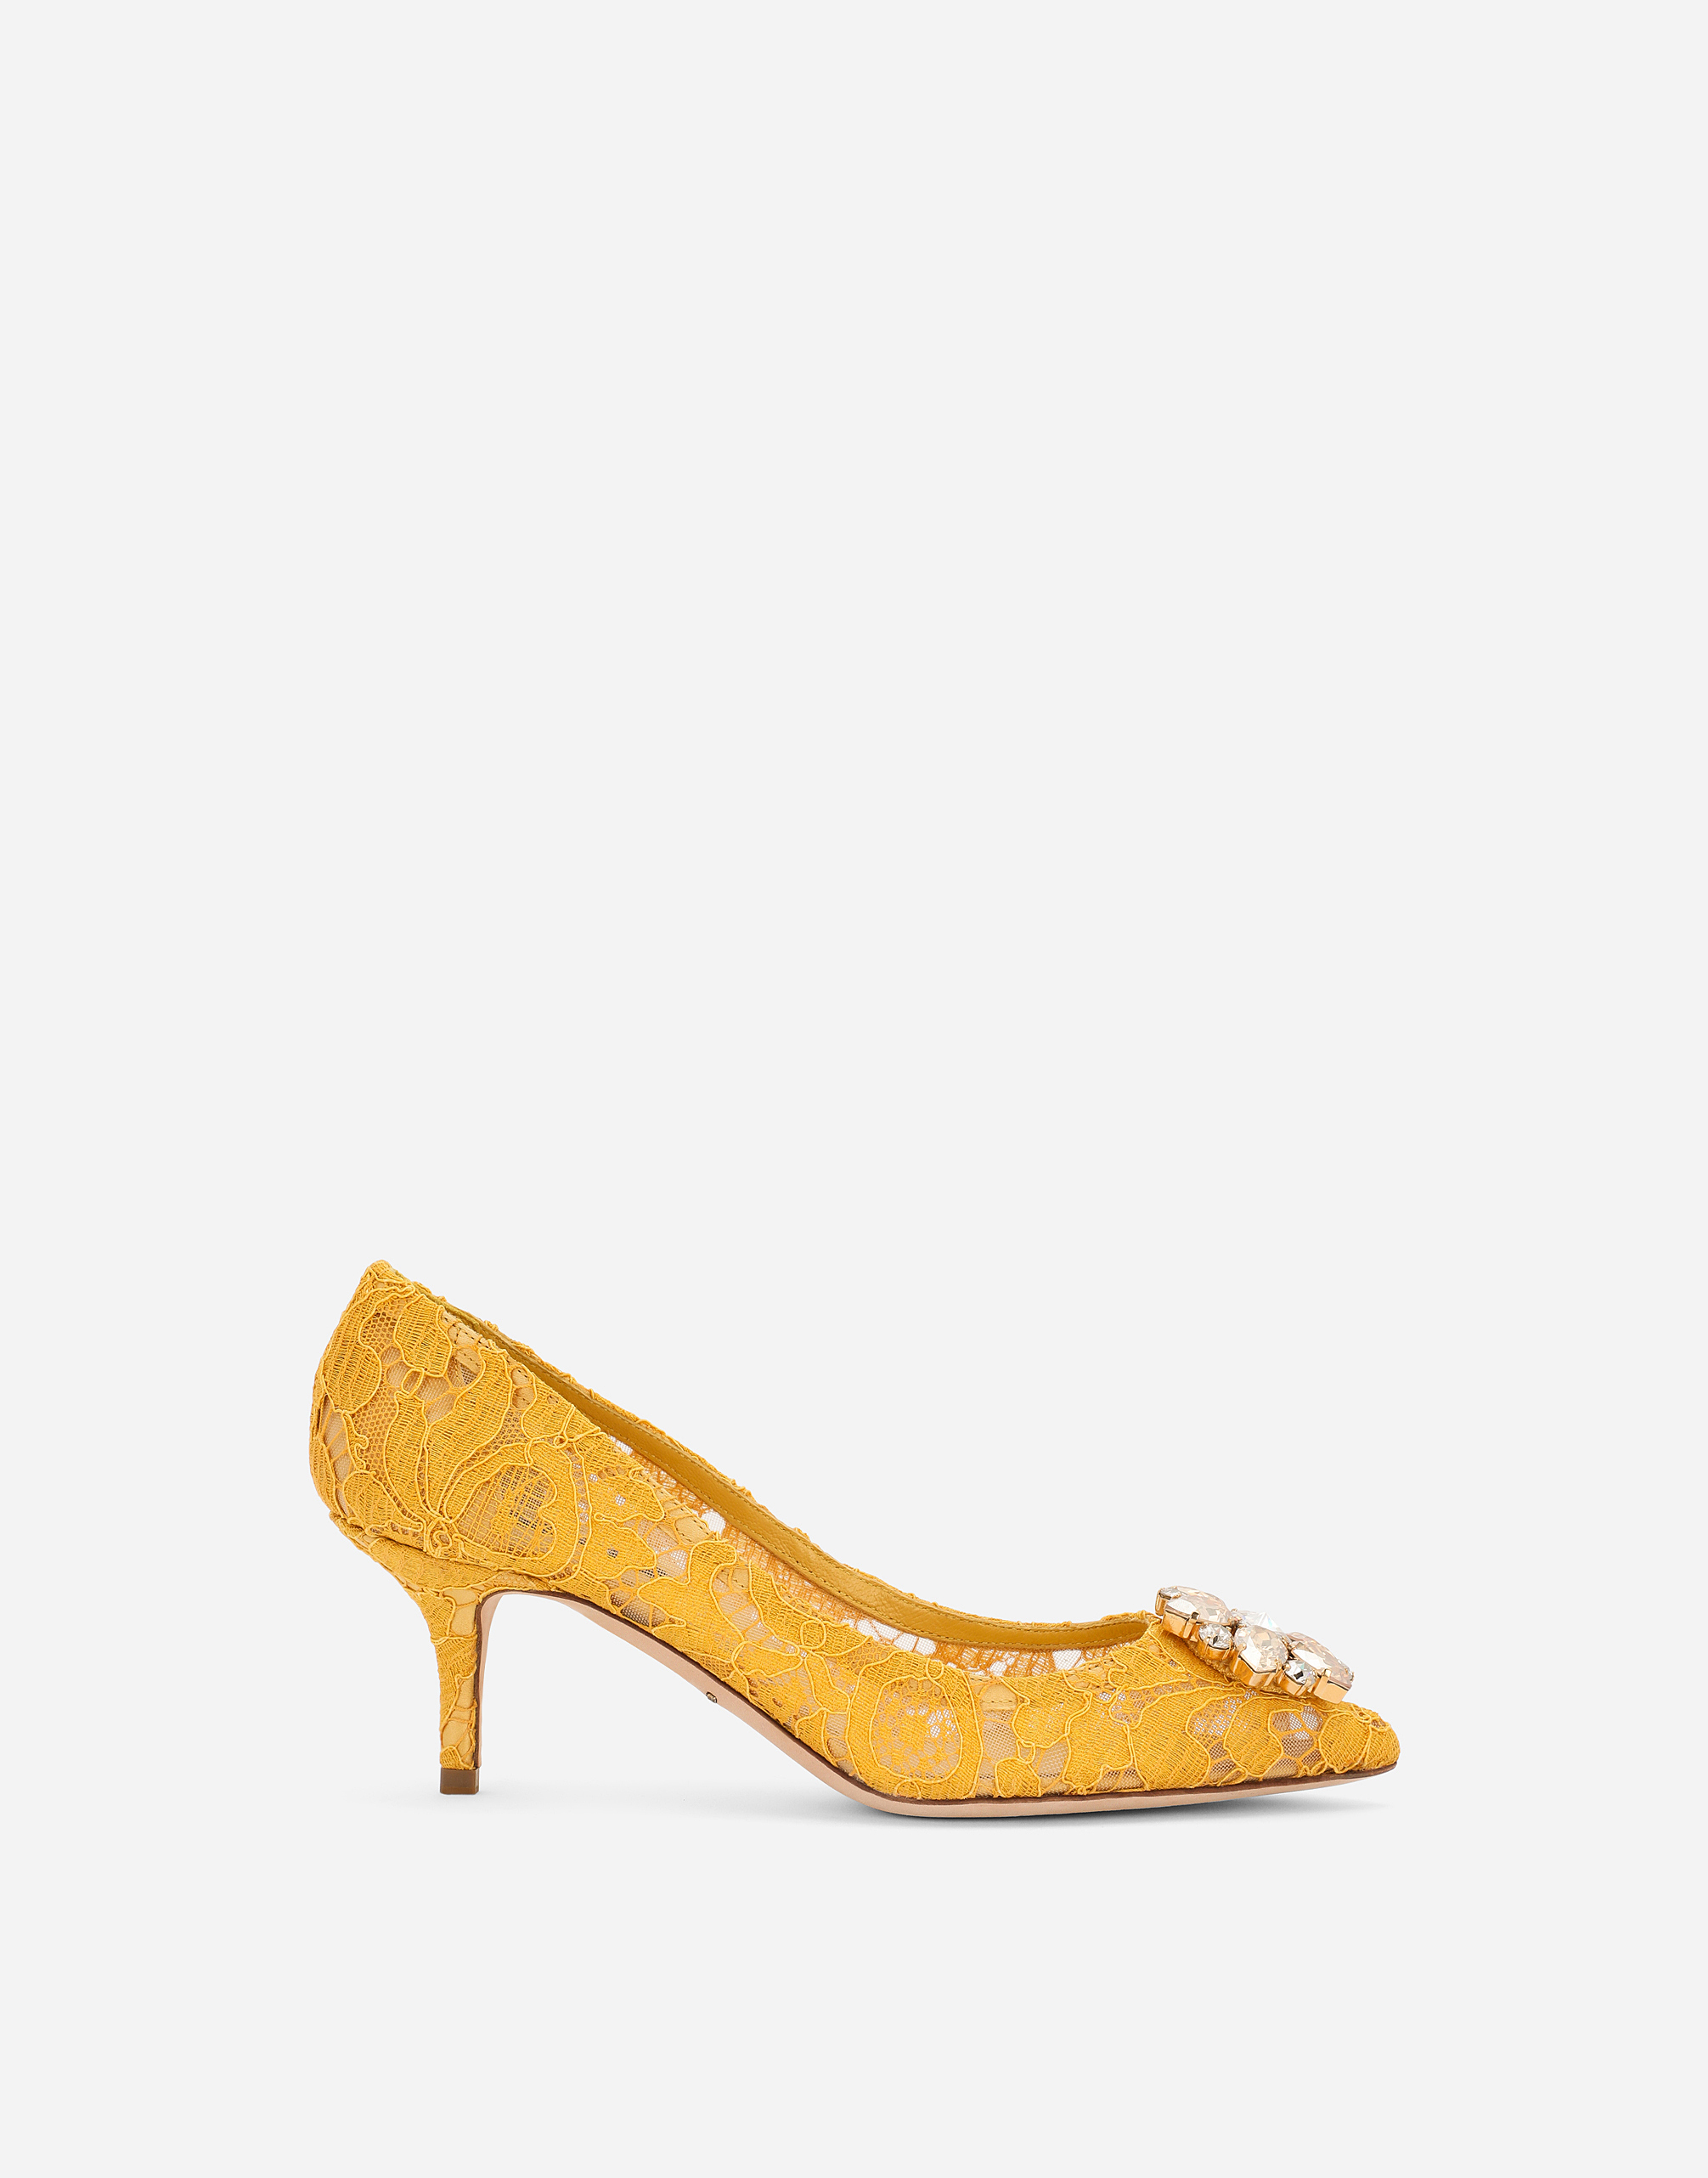 Lace rainbow pumps with brooch detailing in Yellow